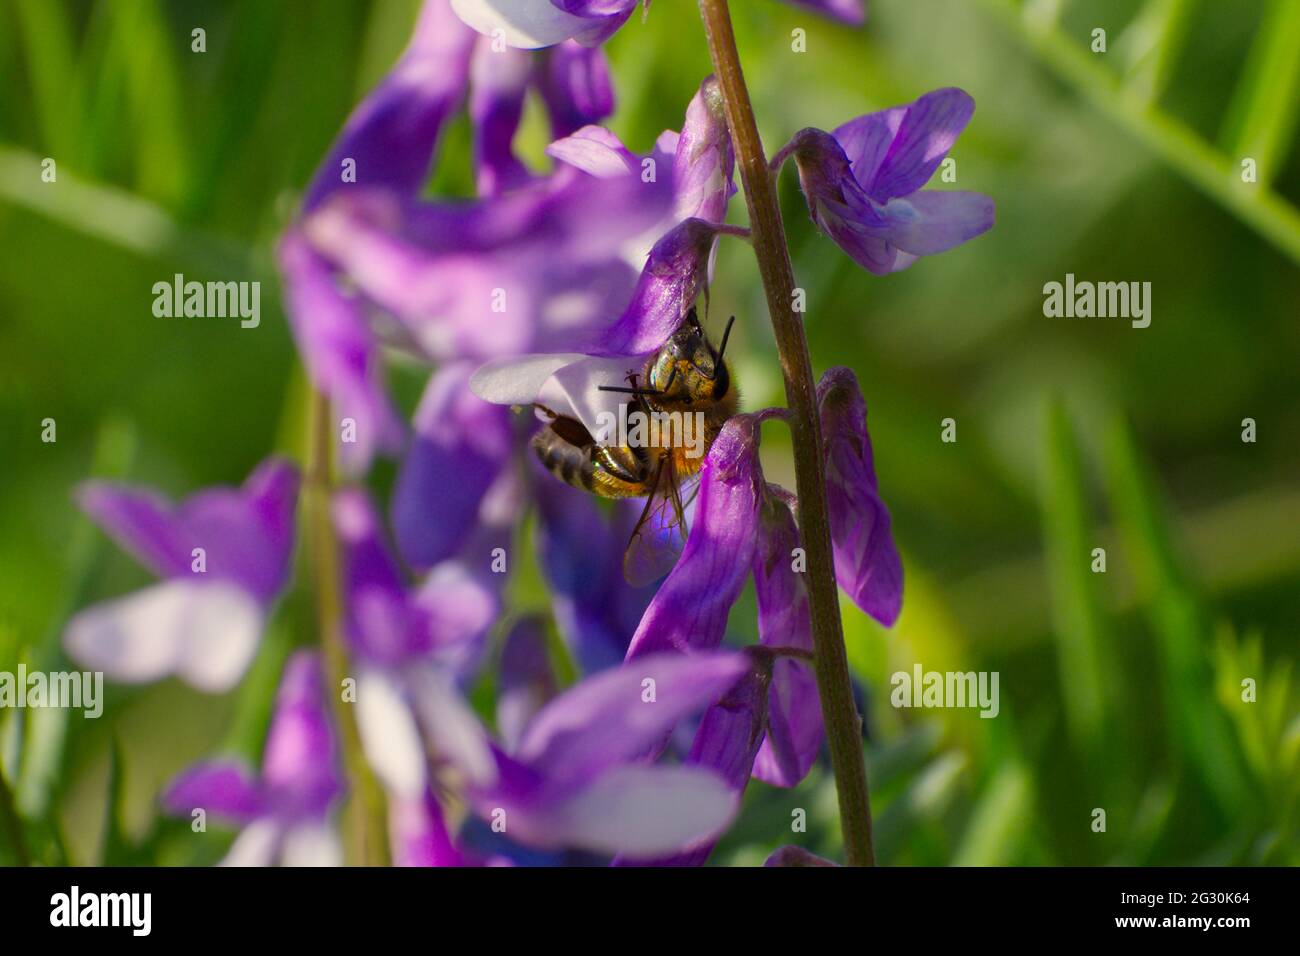 Insects images, nature landscape Stock Photo